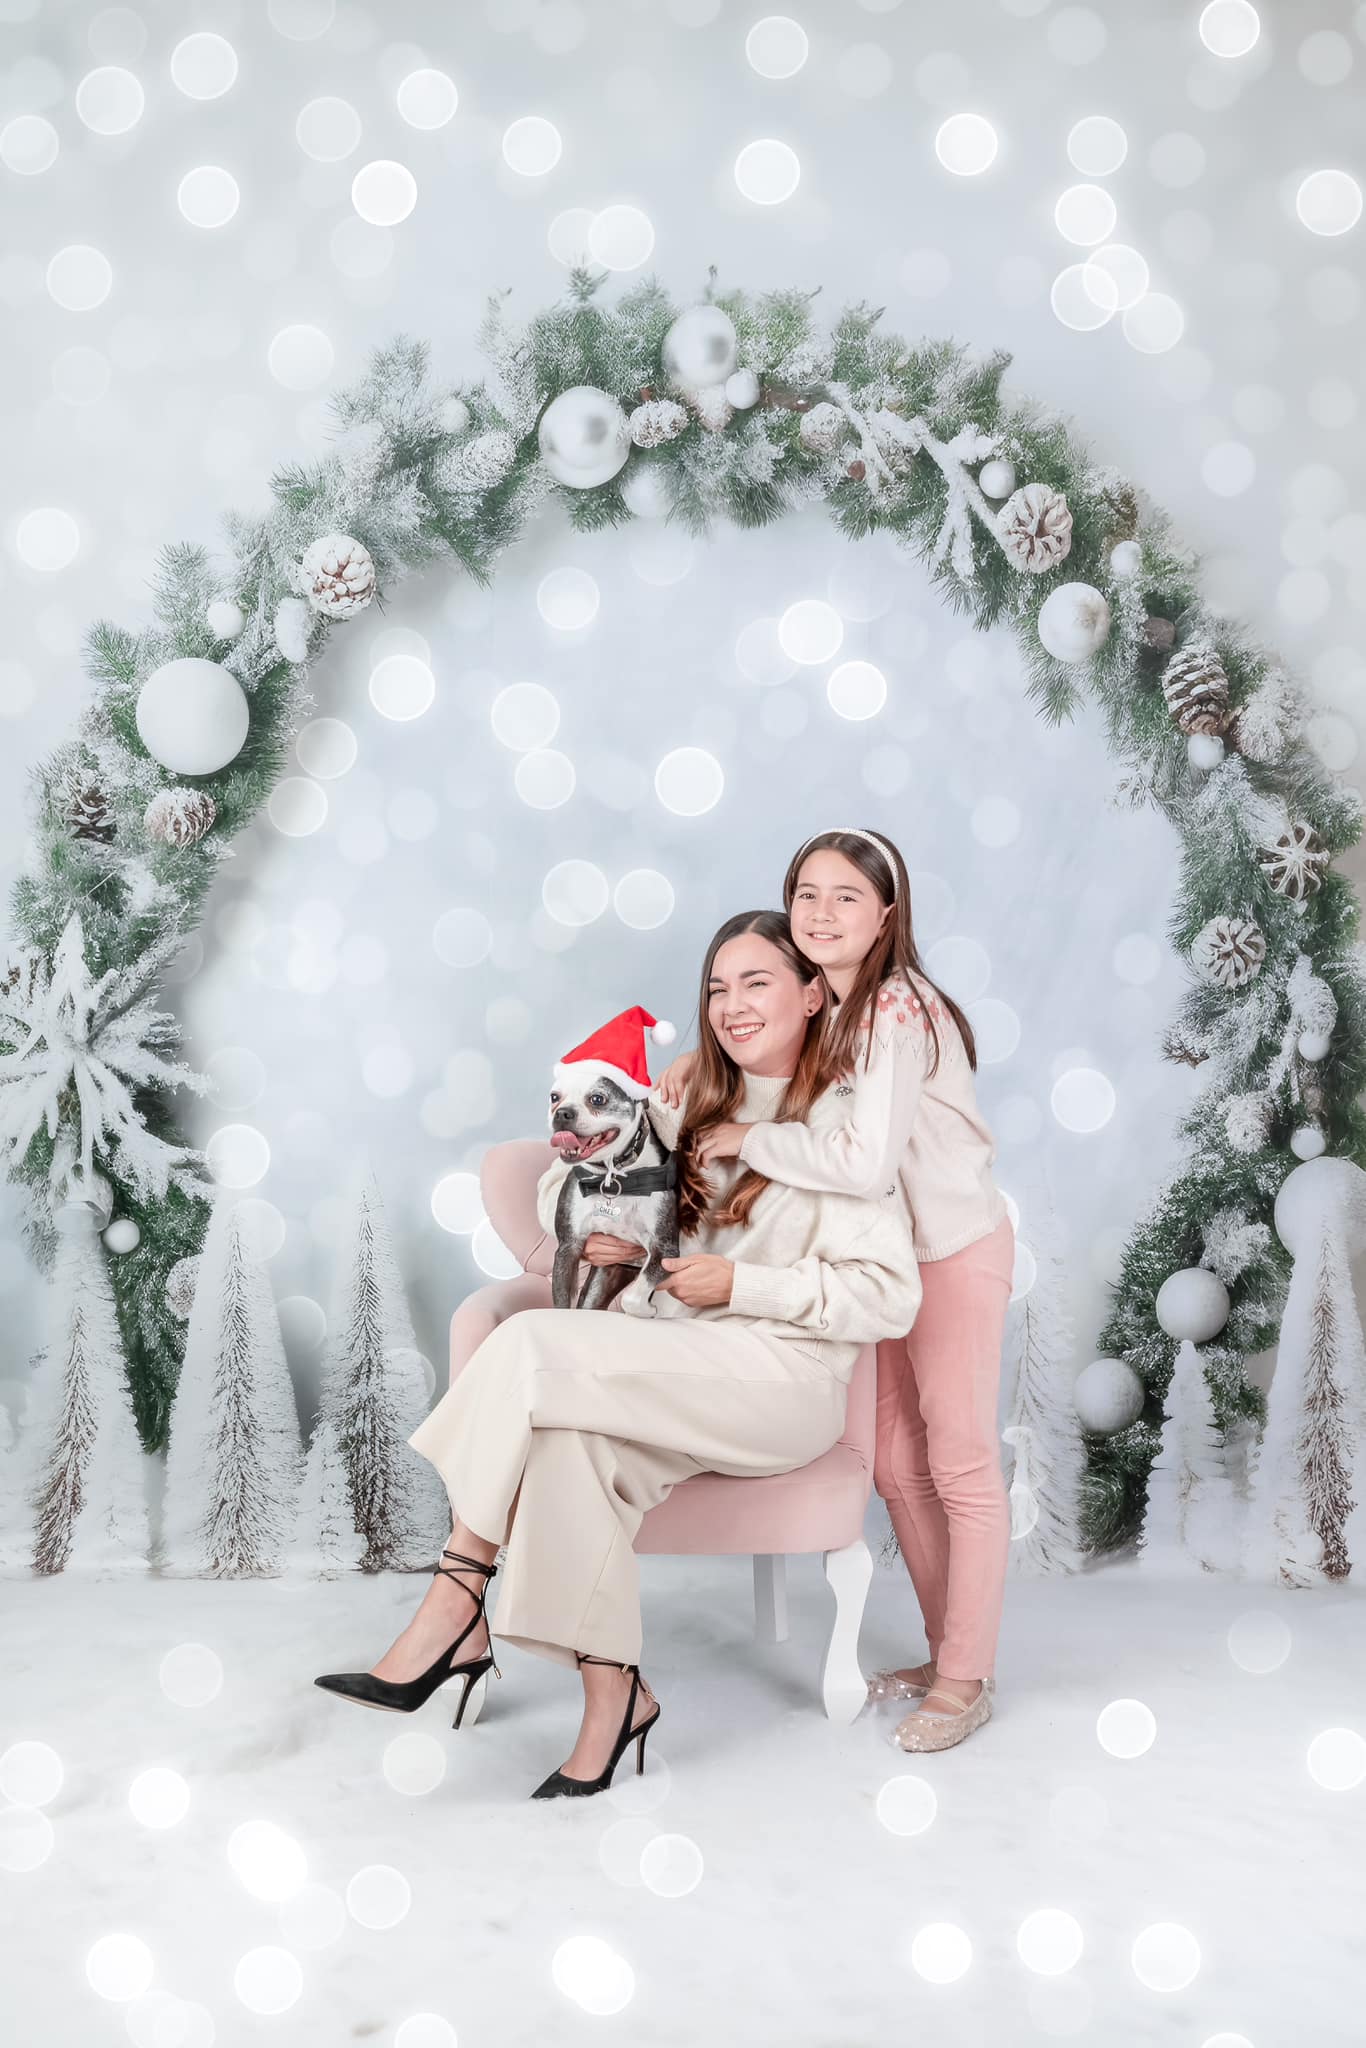 Kate Winter Christmas Arch Backdrop for Photography